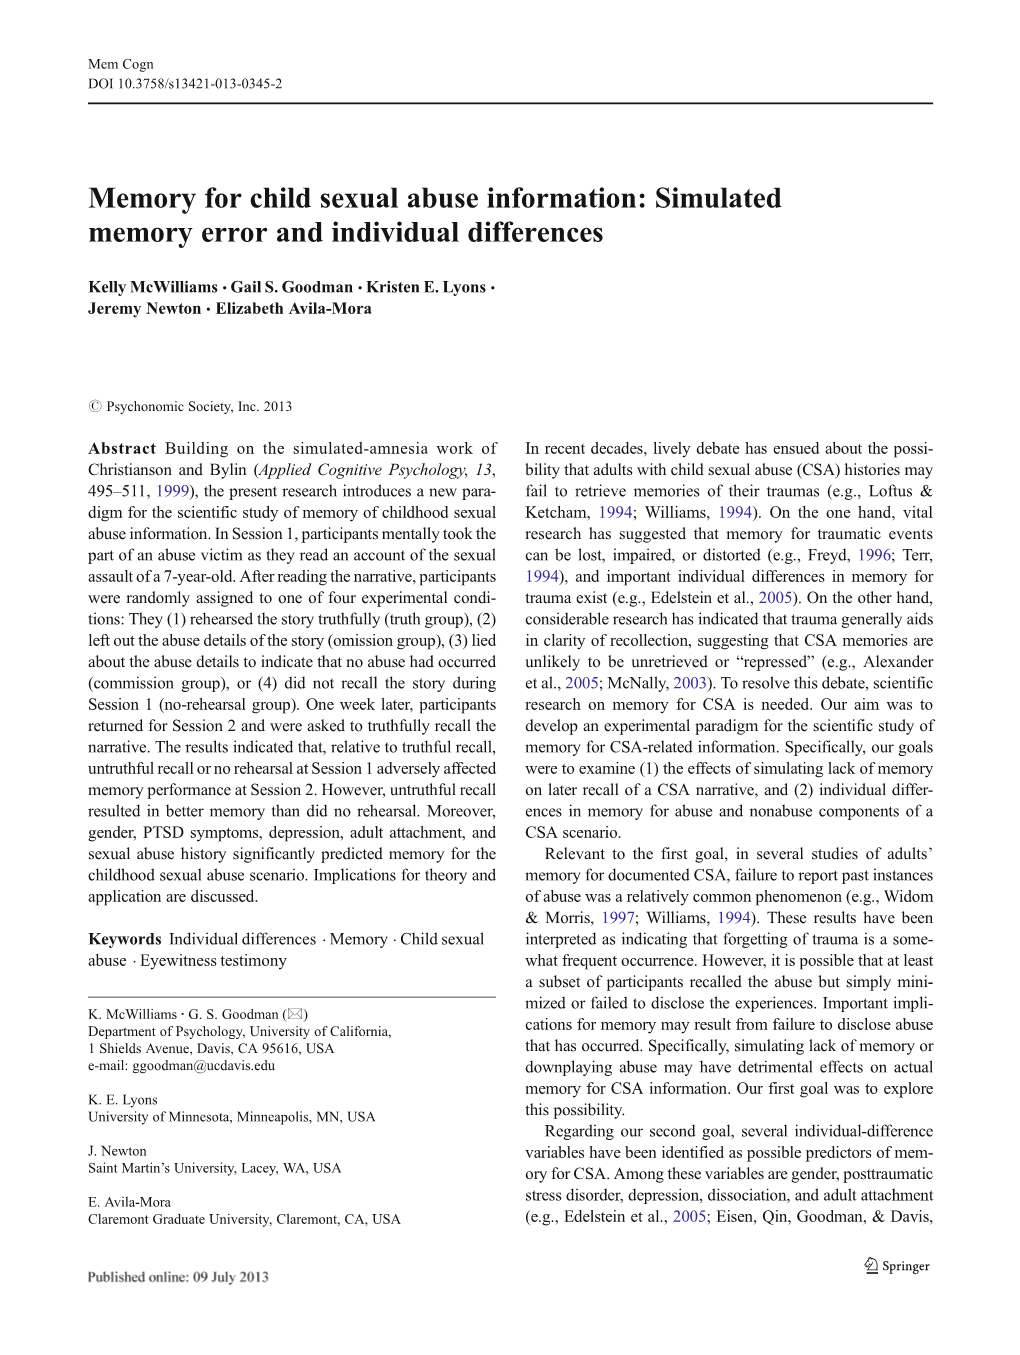 Simulated Memory Error and Individual Differences